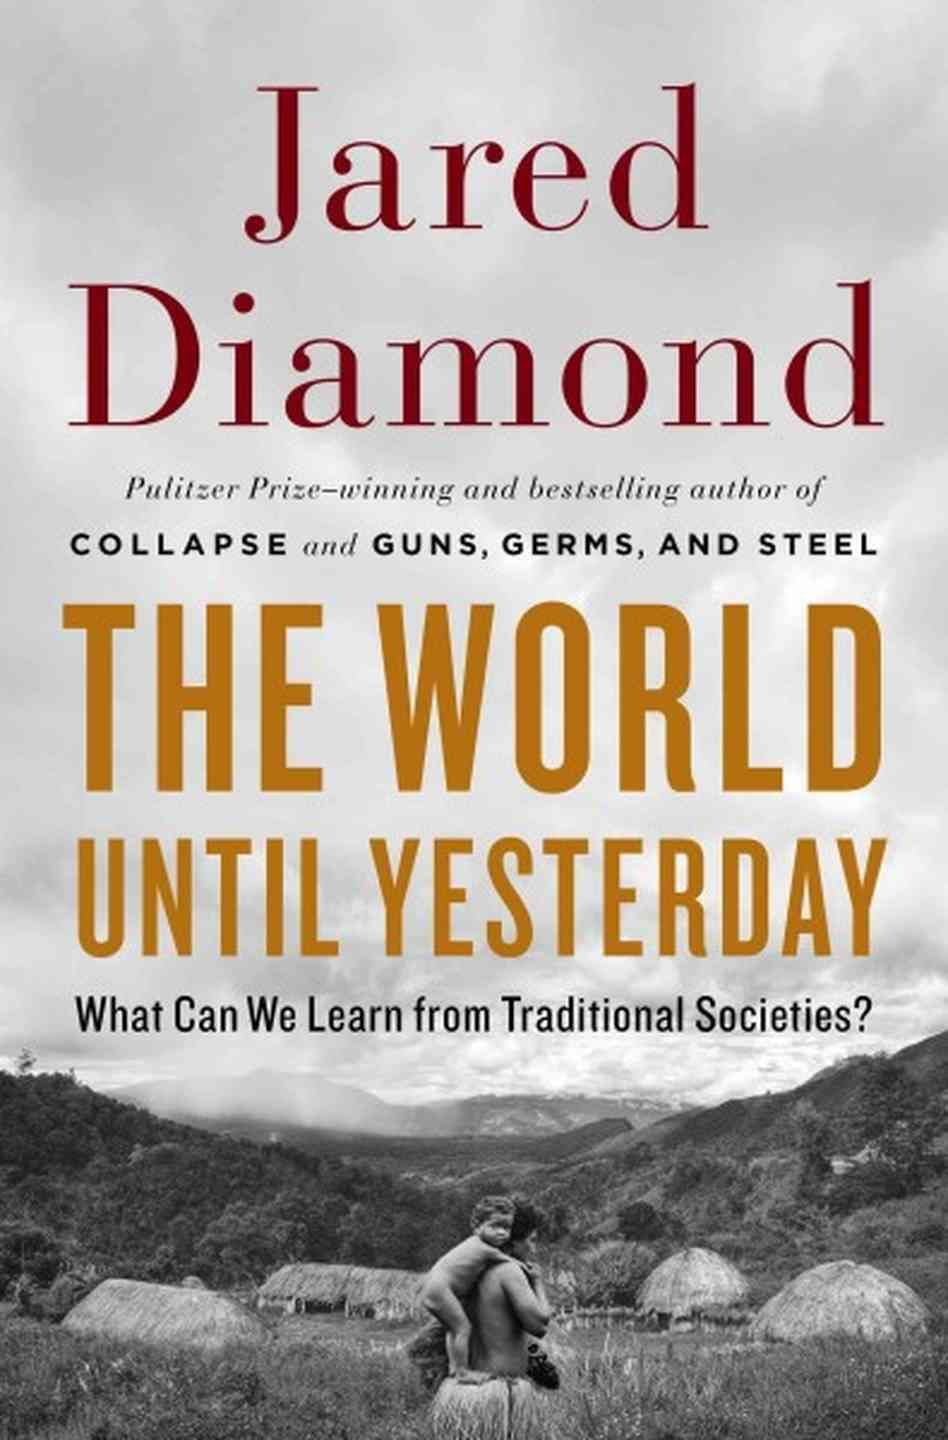 What Can We Learn from Jared Diamond?